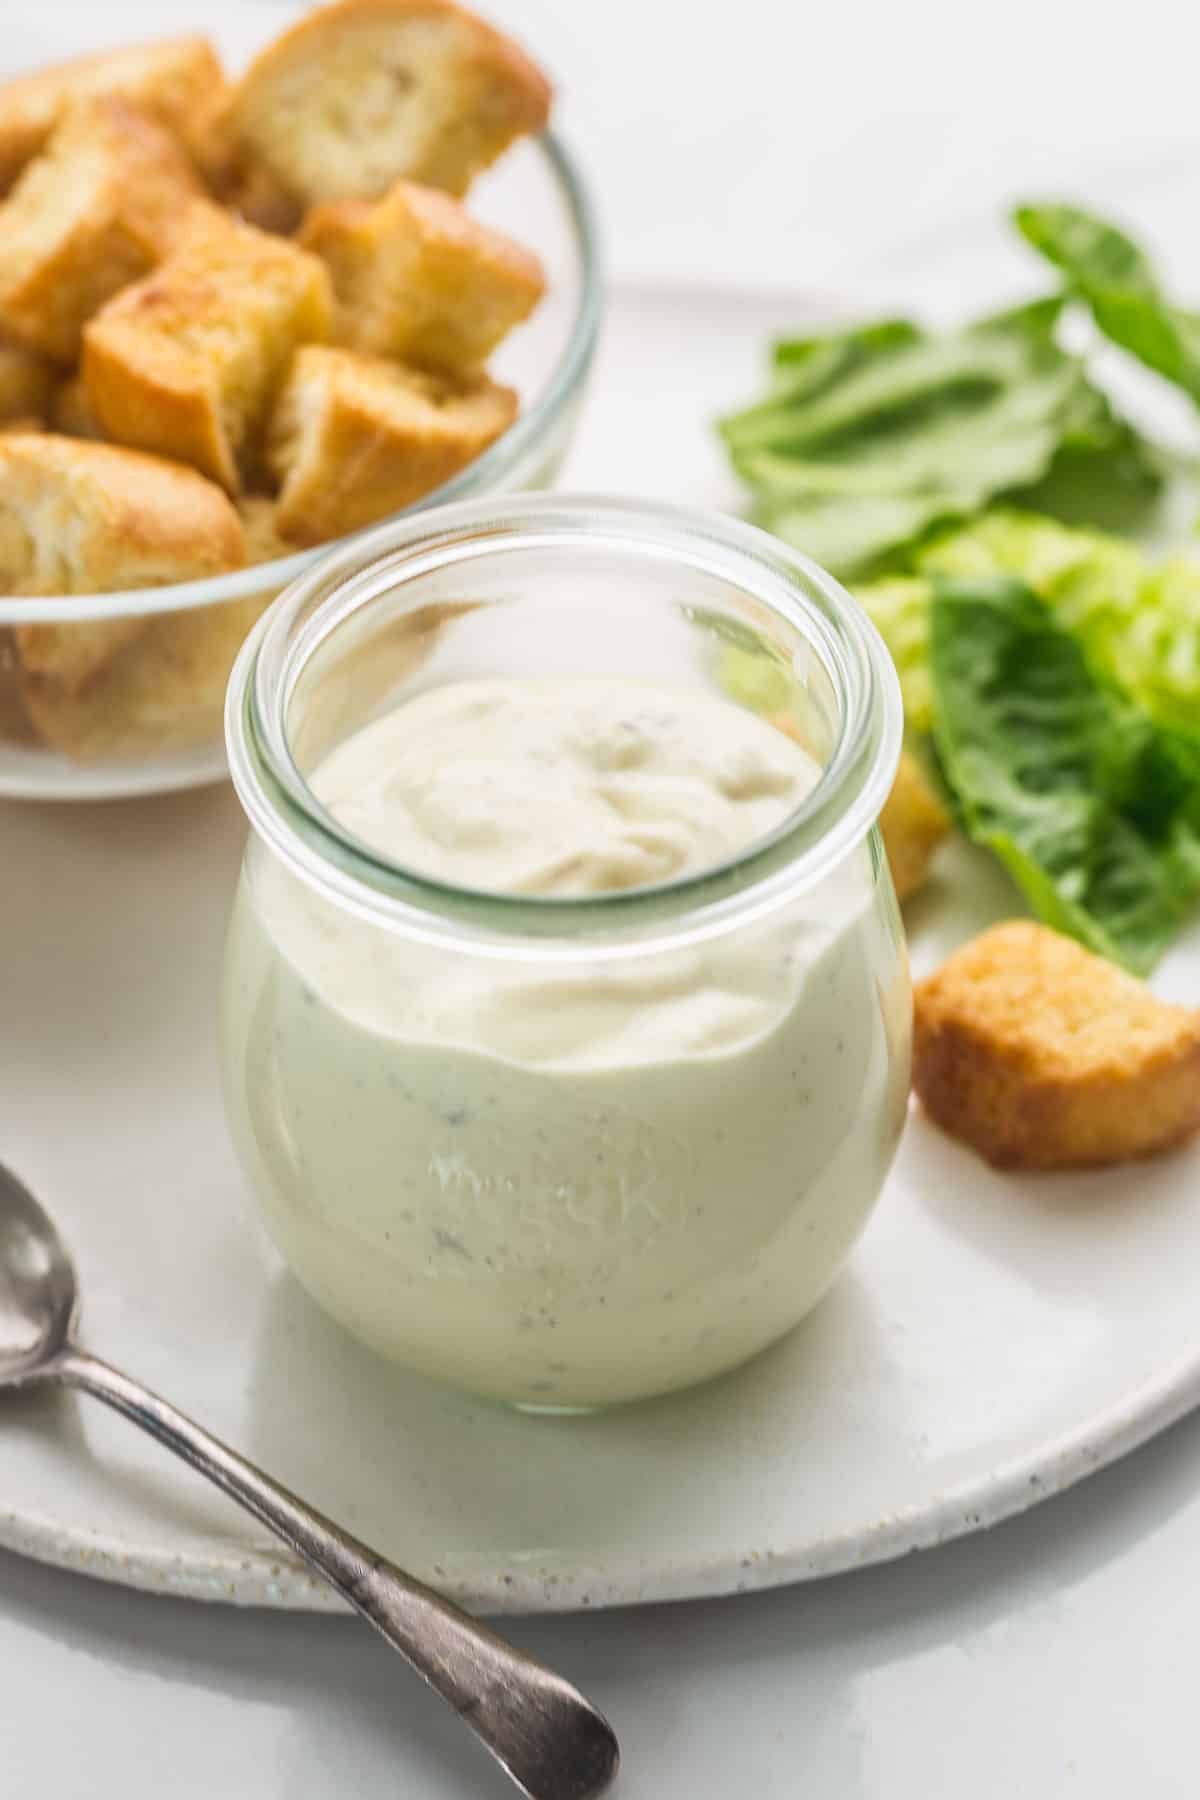 A small Weck jar with Caesar dressing on a ceramic white tray, and a spoon